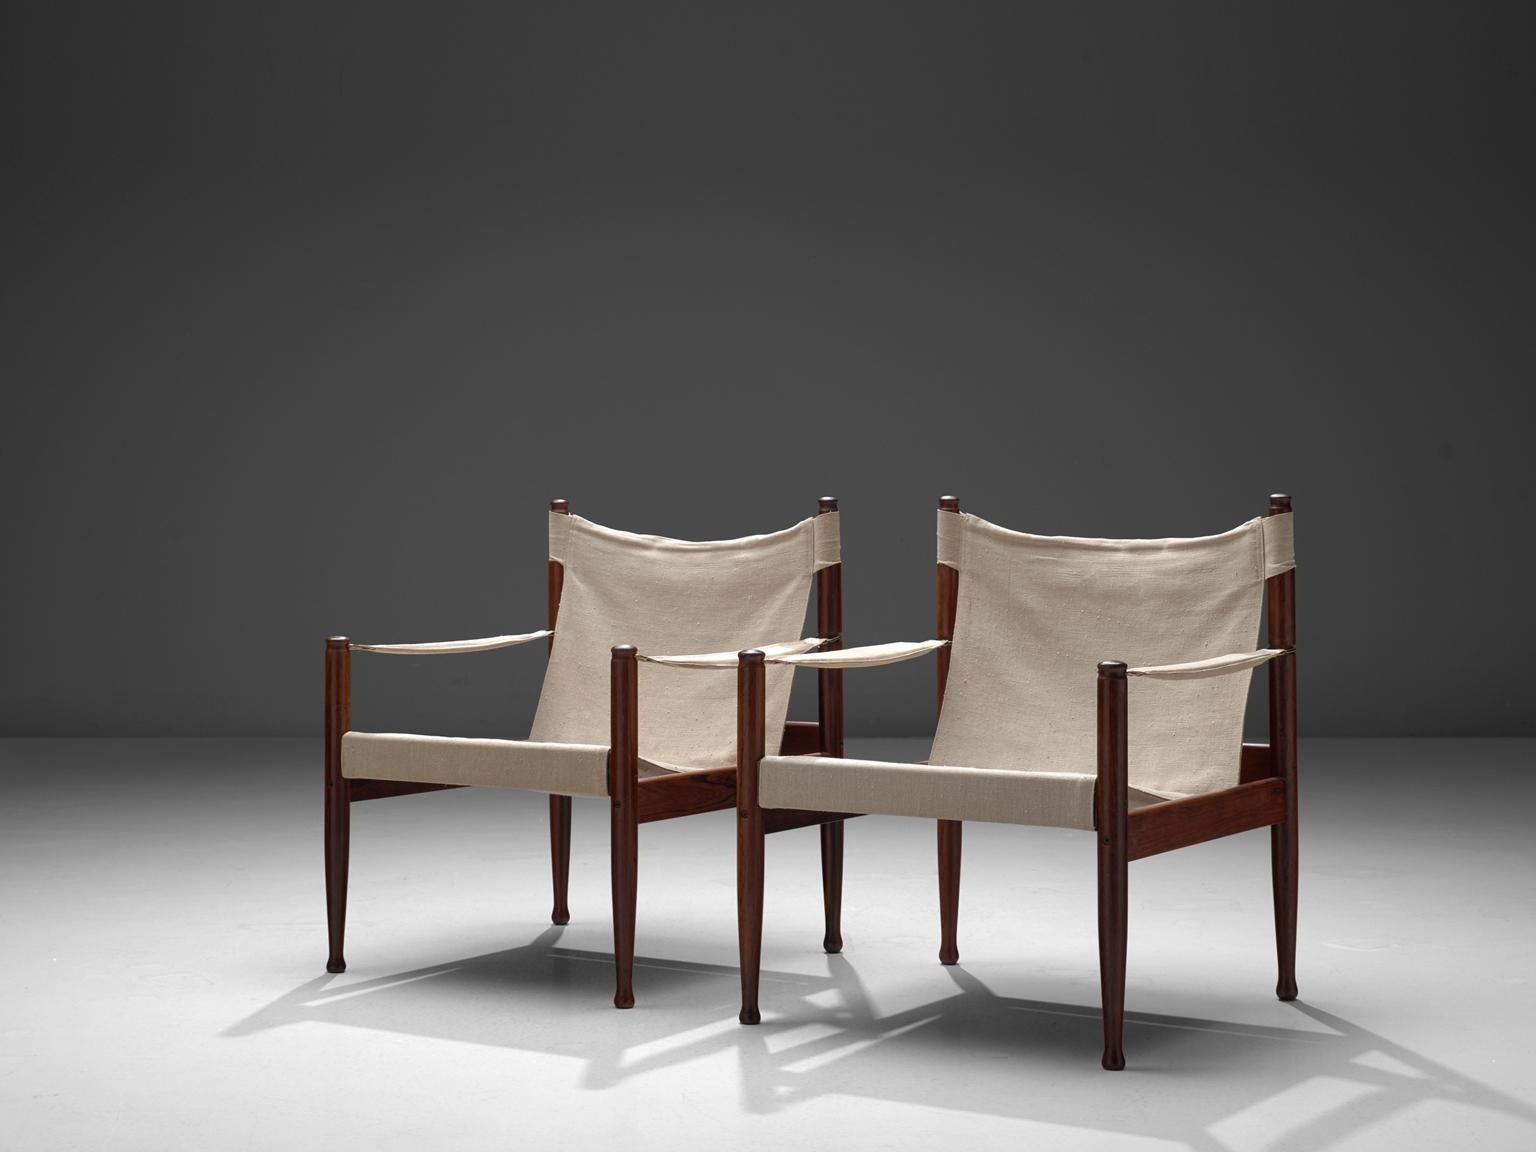 Erik Wørts for Niels Eilsersen, set of two armchairs, rosewood, brass and canvas, Denmark, 1960s. 

These sturdy lounge chairs with refined detail are designed by Danish designer Erik Wørts. The safari easy chairs have a laidback expression due to